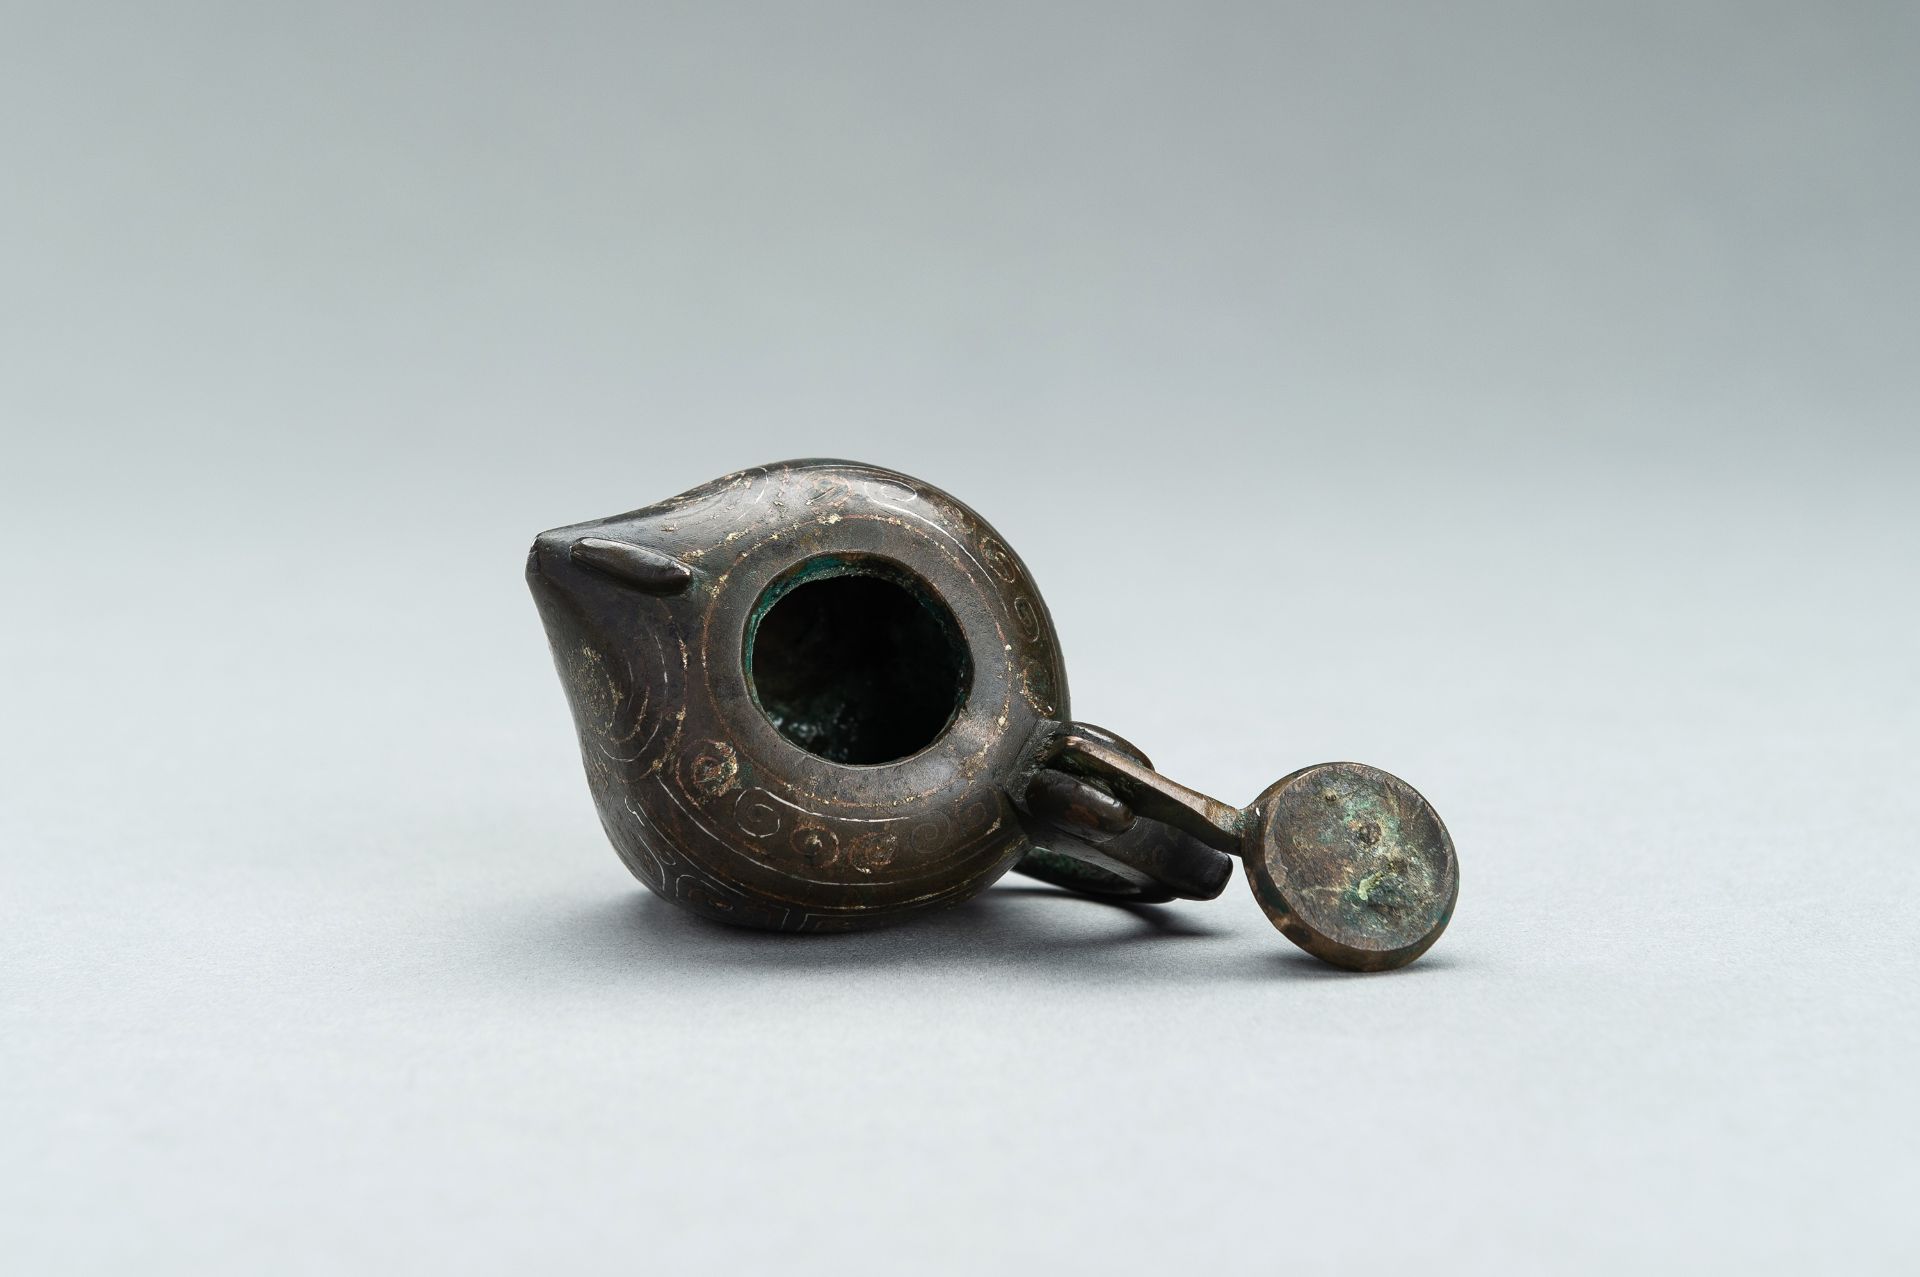 A SMALL COPPER AND SILVER INLAID BRONZE POURING TRIPOD VESSEL IN THE FORM OF AN ANIMAL, 17TH CENTURY - Image 10 of 11